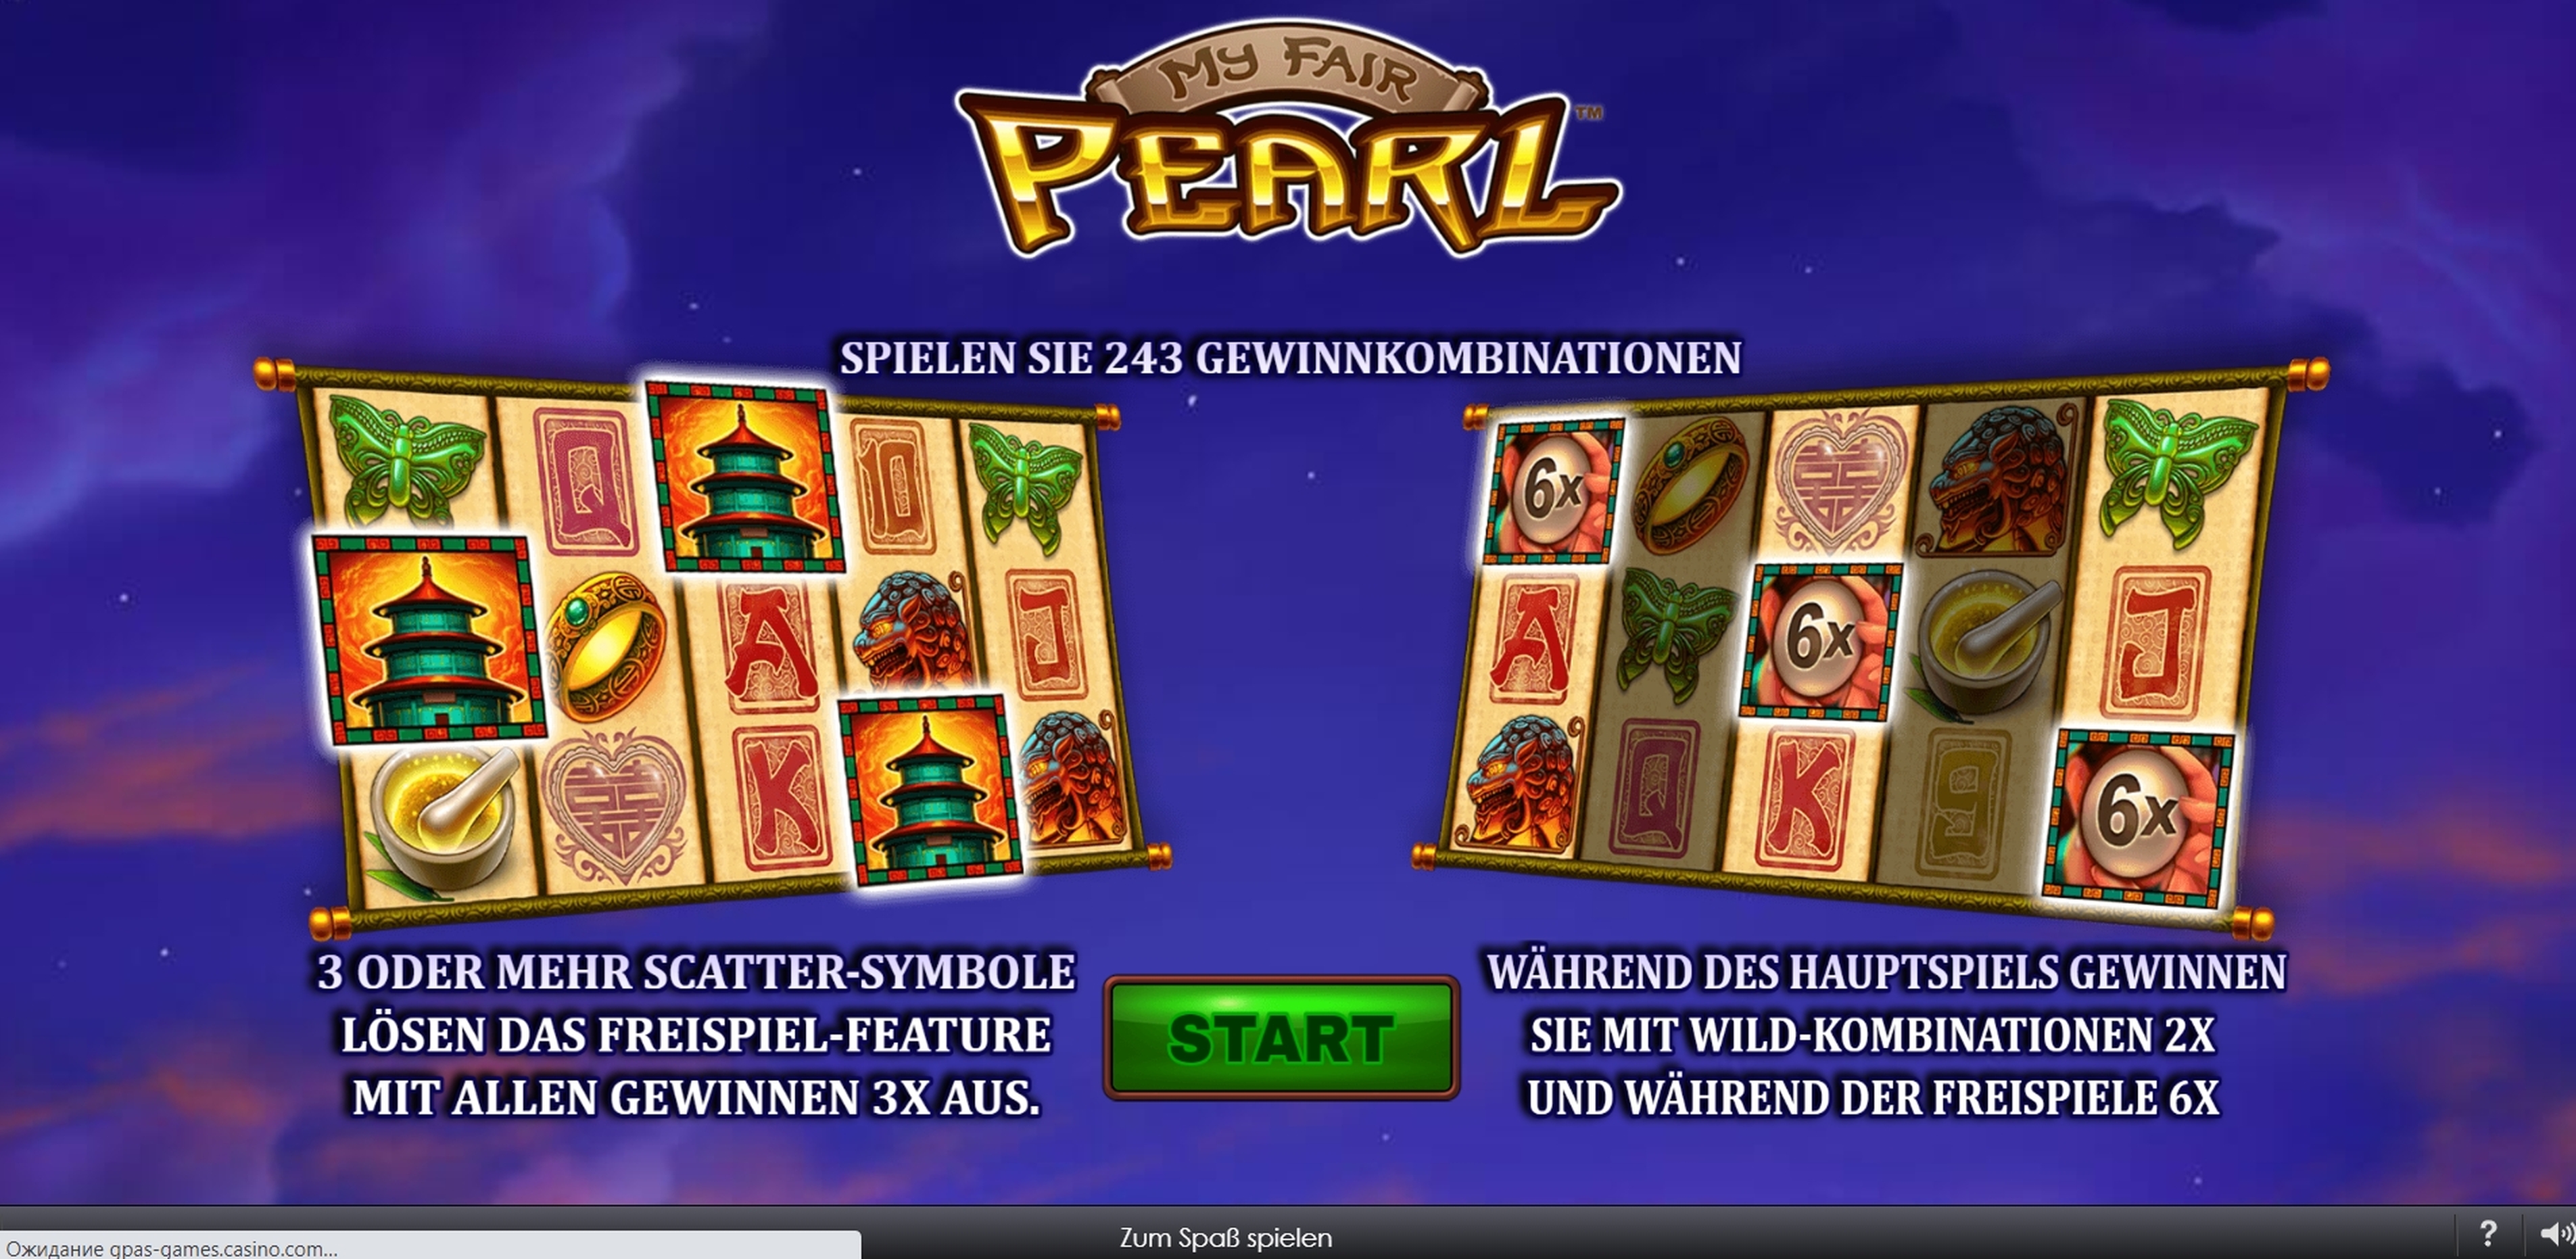 Play My Fair Pearl Free Casino Slot Game by GECO Gaming